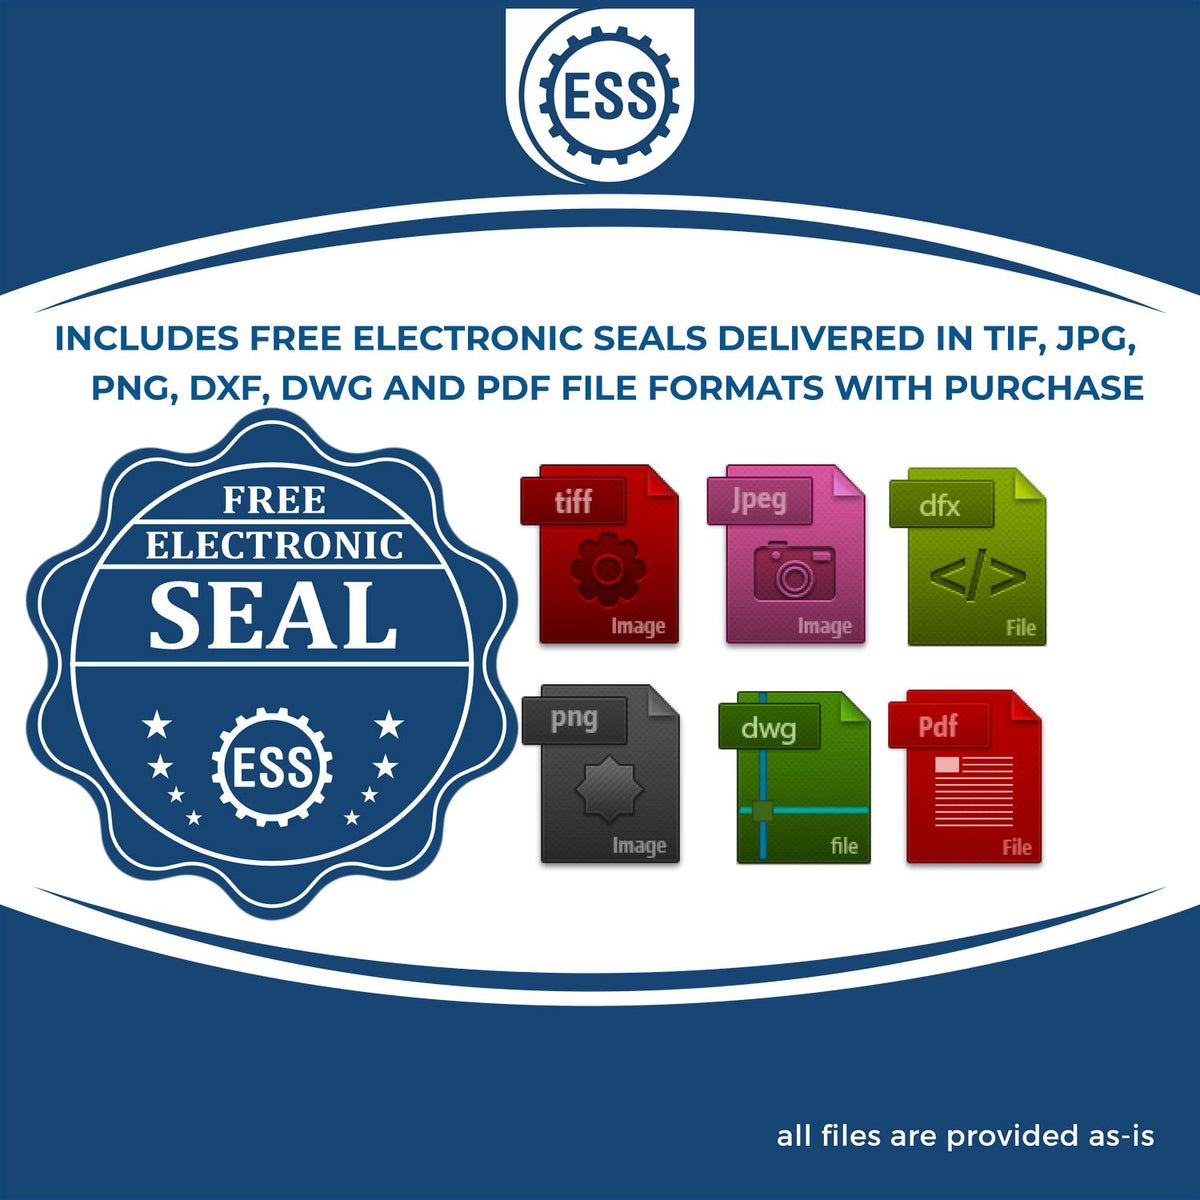 An infographic for the free electronic seal for the Wooden Handle Alabama State Seal Notary Public Stamp illustrating the different file type icons such as DXF, DWG, TIF, JPG and PNG.